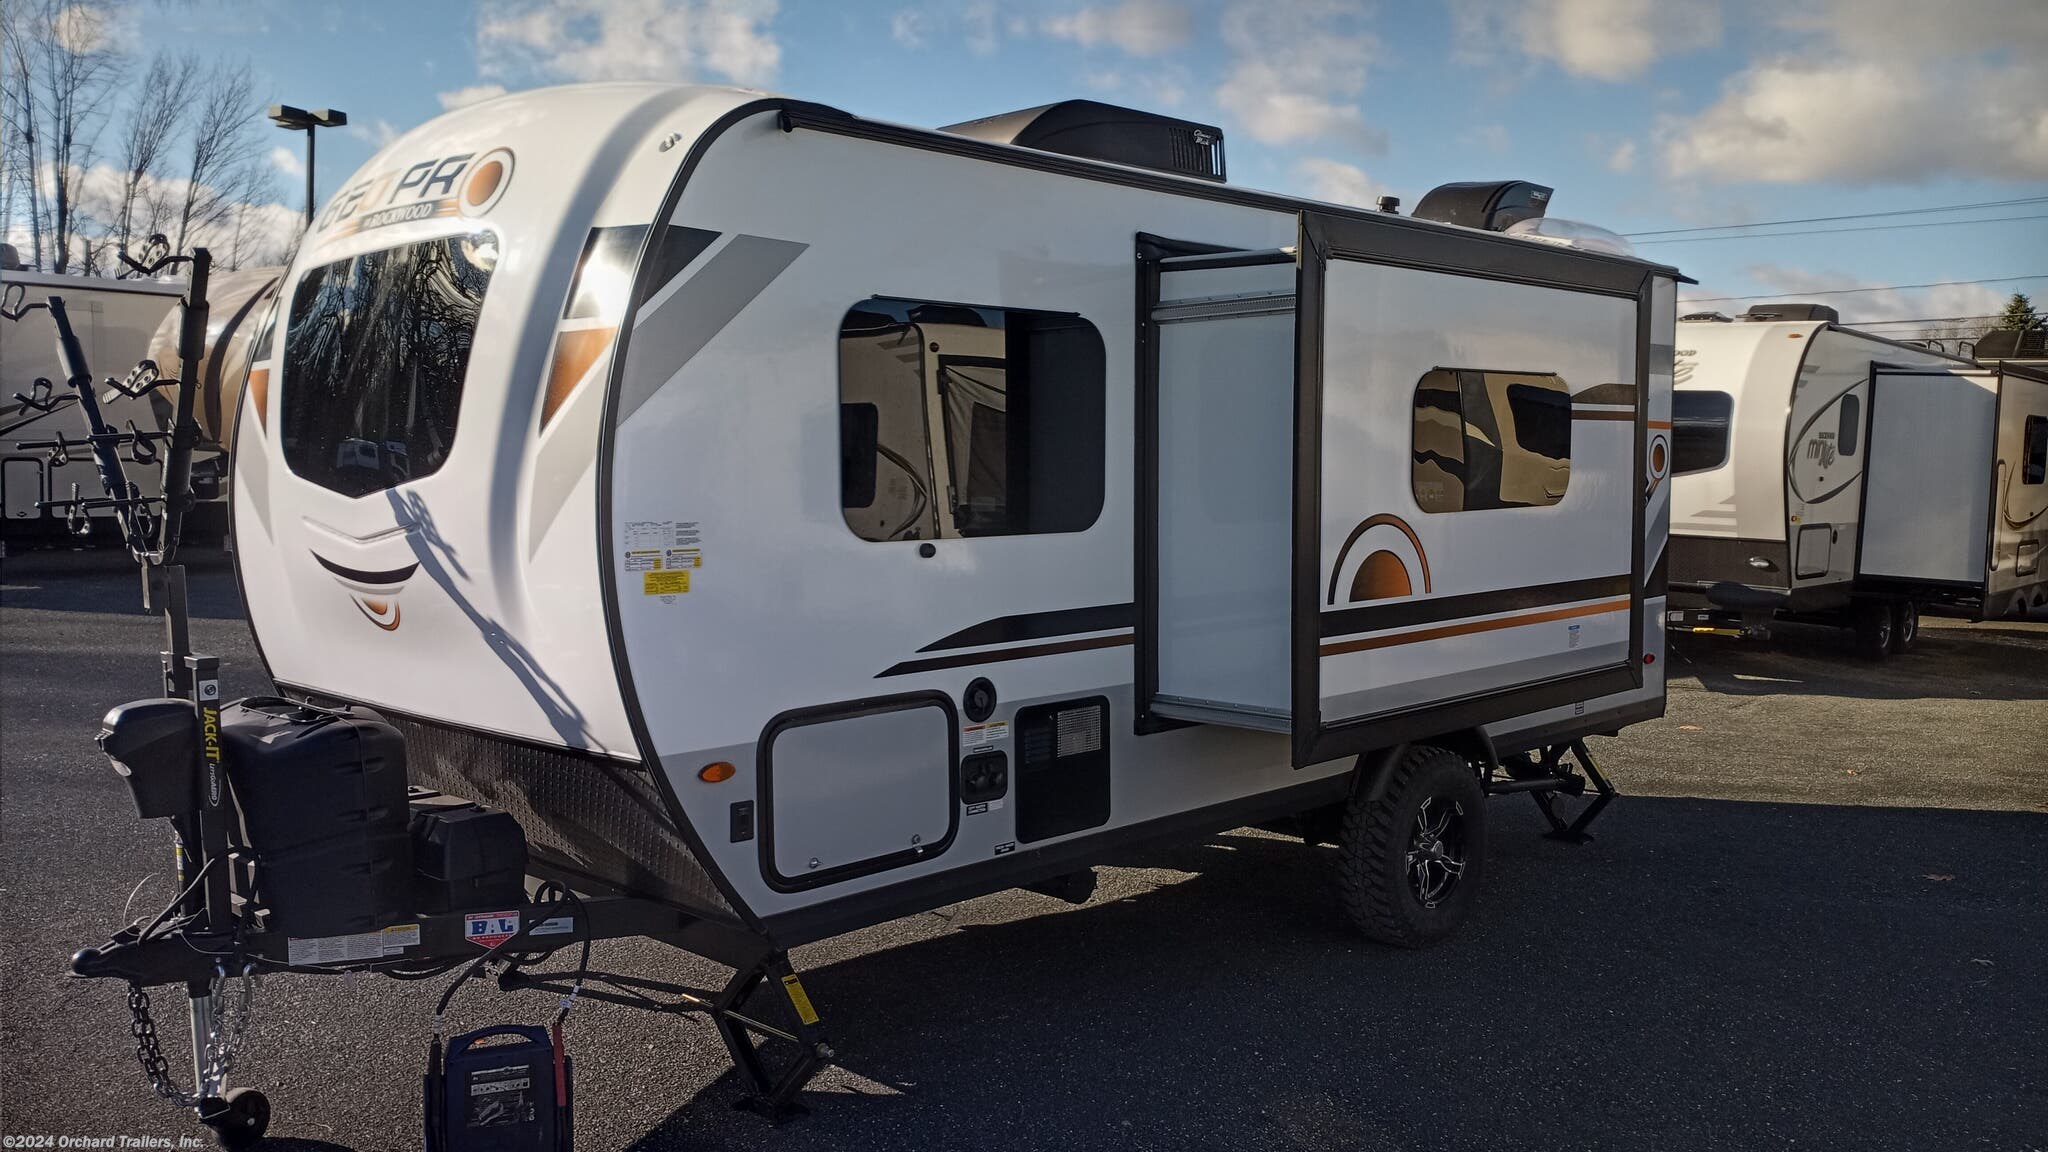 2021 Forest River Rockwood Geo Pro G19FBS RV for Sale in Whately, MA 01093 | 105281 | RVUSA.com 2021 Rockwood Geo Pro G19fbs Travel Trailer